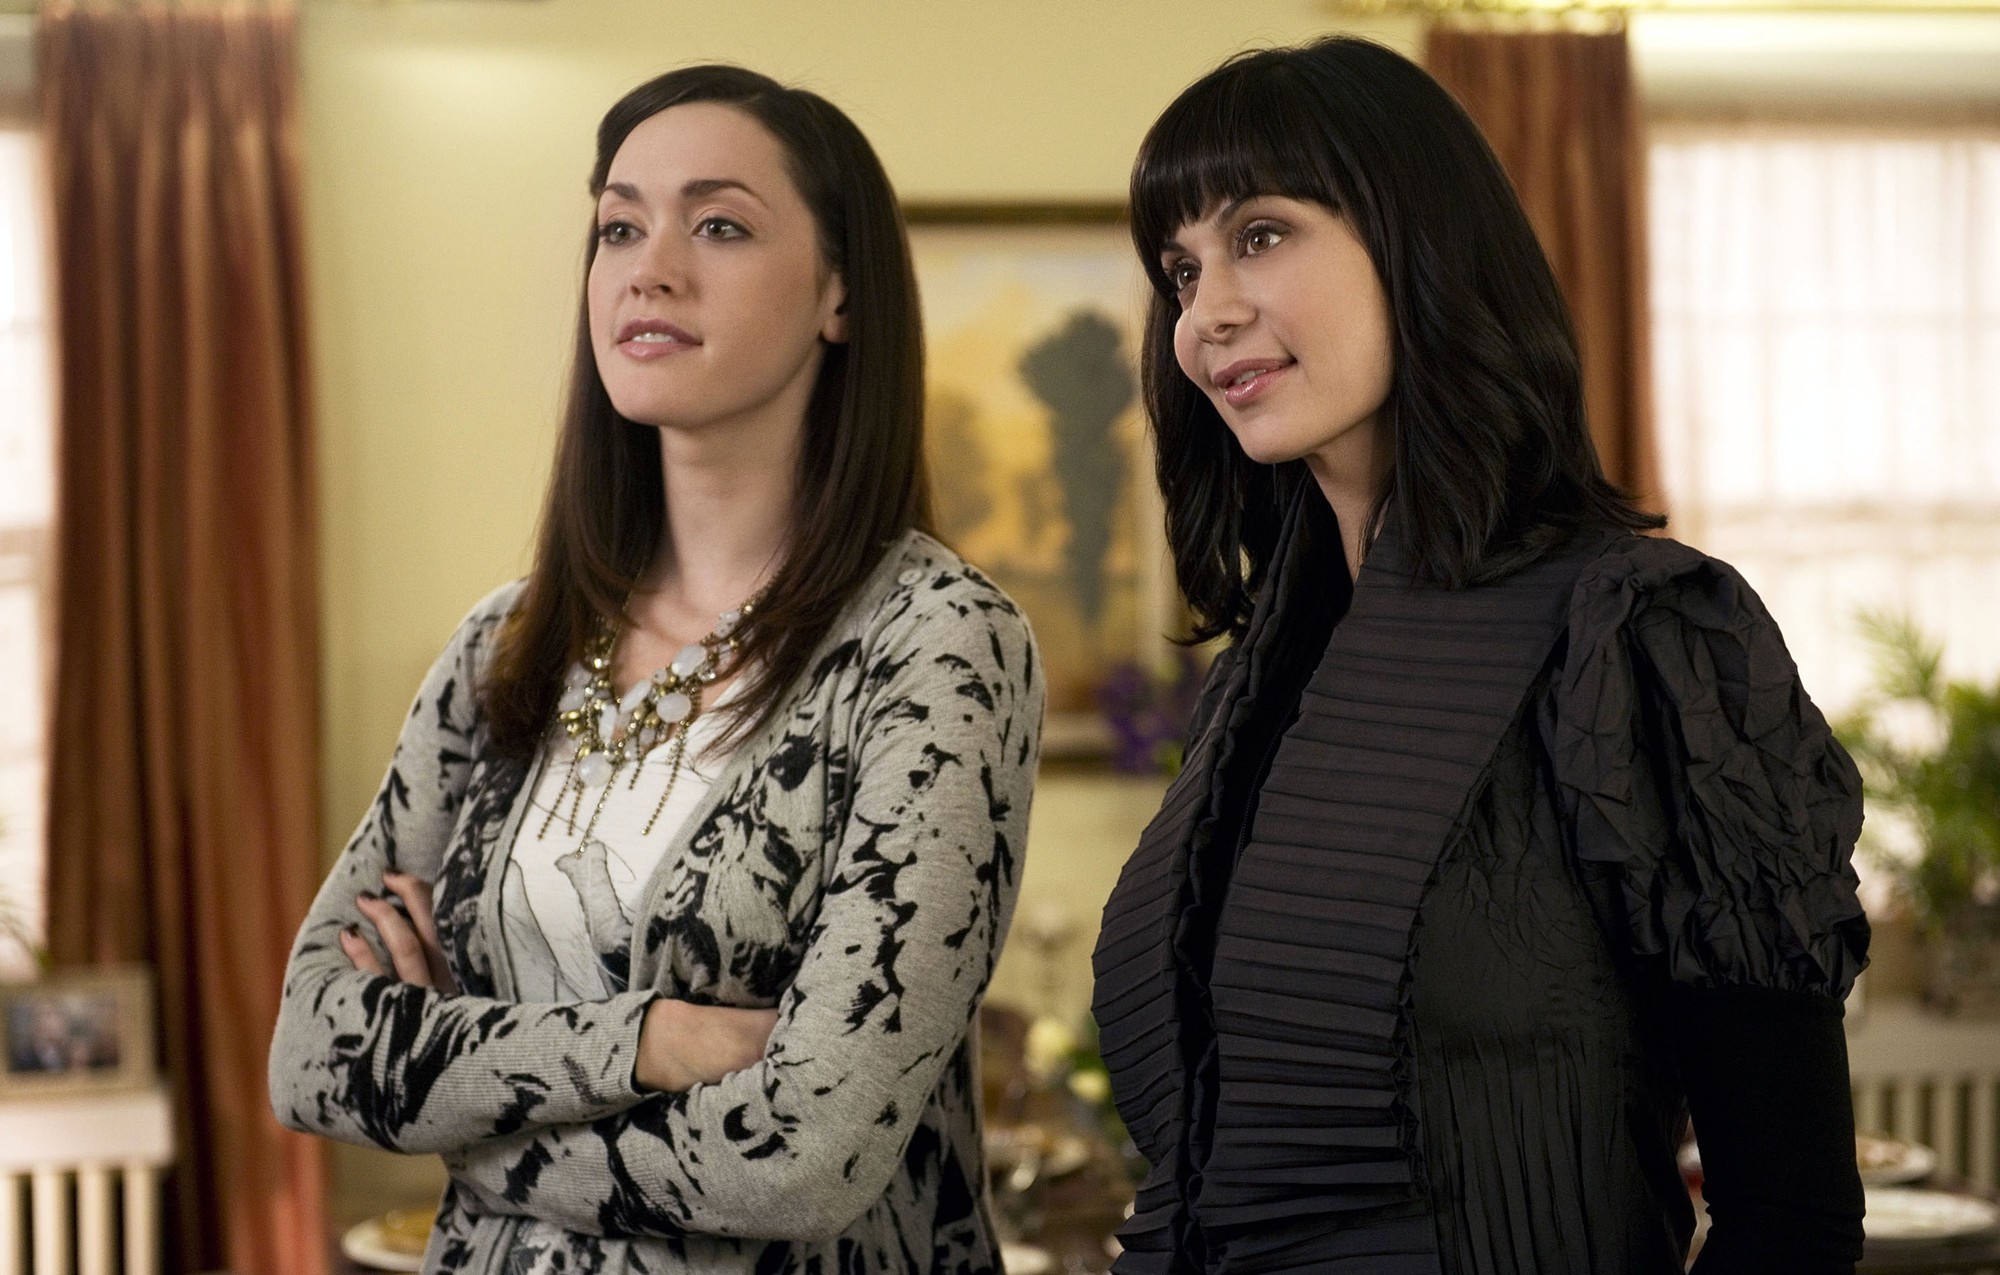 Sarah Power stars as Abigail Pershing and Catherine Bell stars as Cassandra Nightingale in Hallmark's The Good Witch's Family (2011)